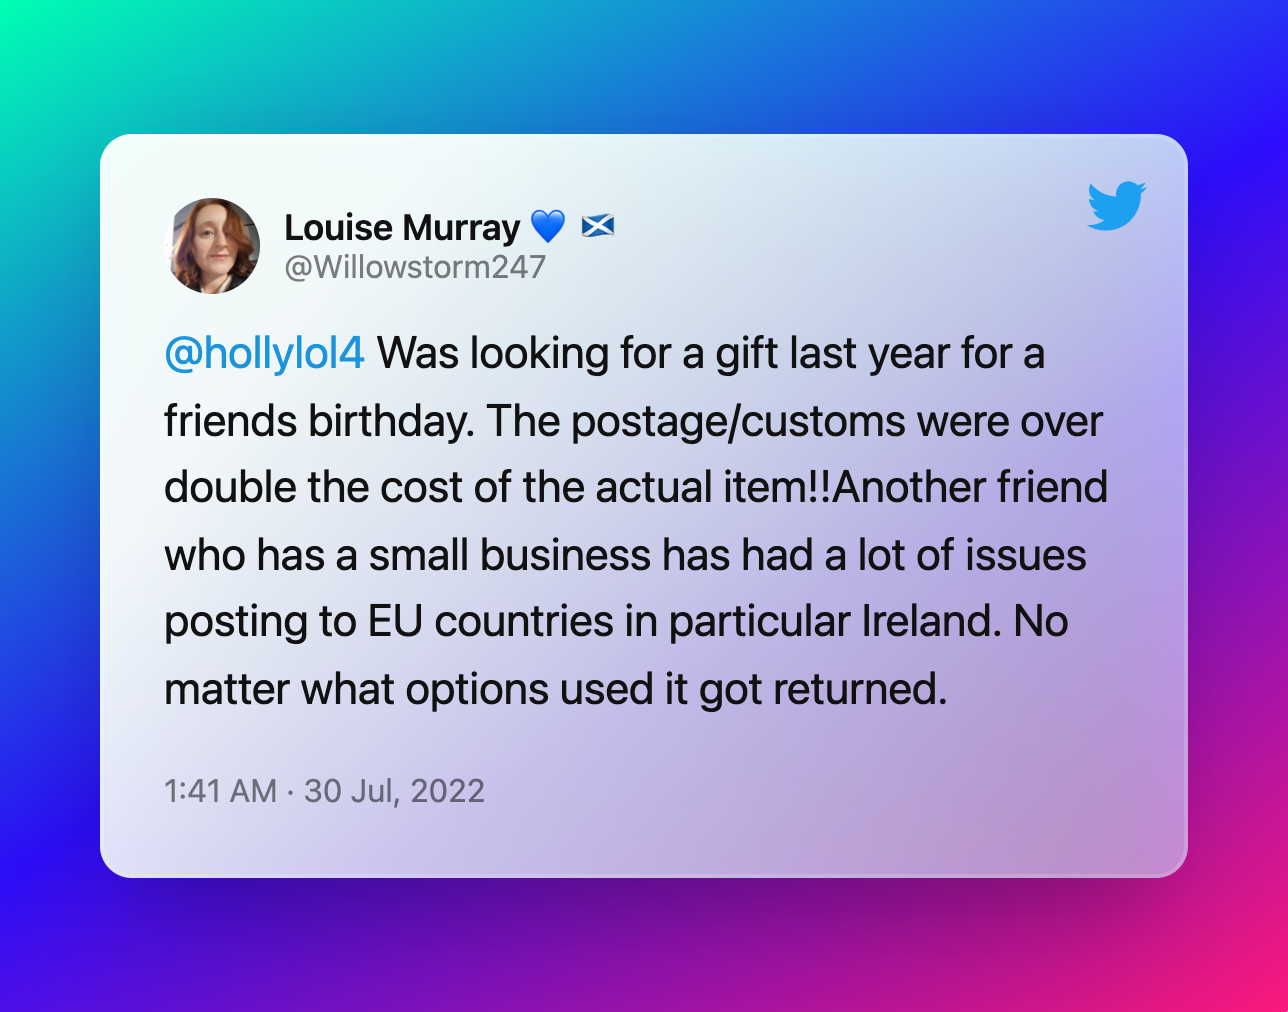 Louise Murray on shipping gifts internationally and postage fees.